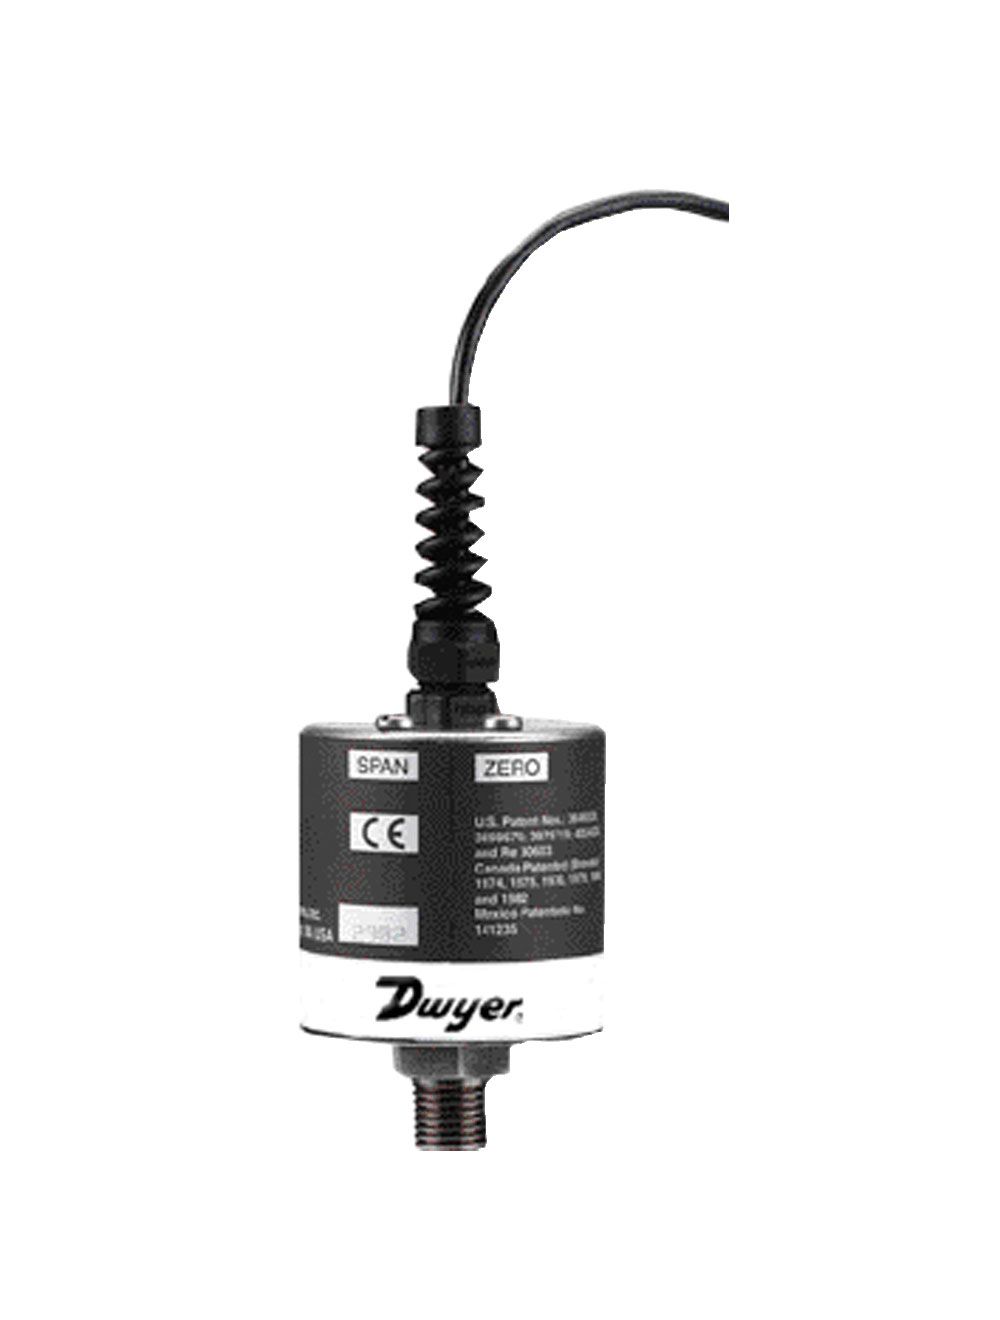 4-20 mA General Purpose Cable 2-wire Dwyer Series IS626 Intrinsically Safe Pressure Transmitter 0-500 psig 3 Ft 